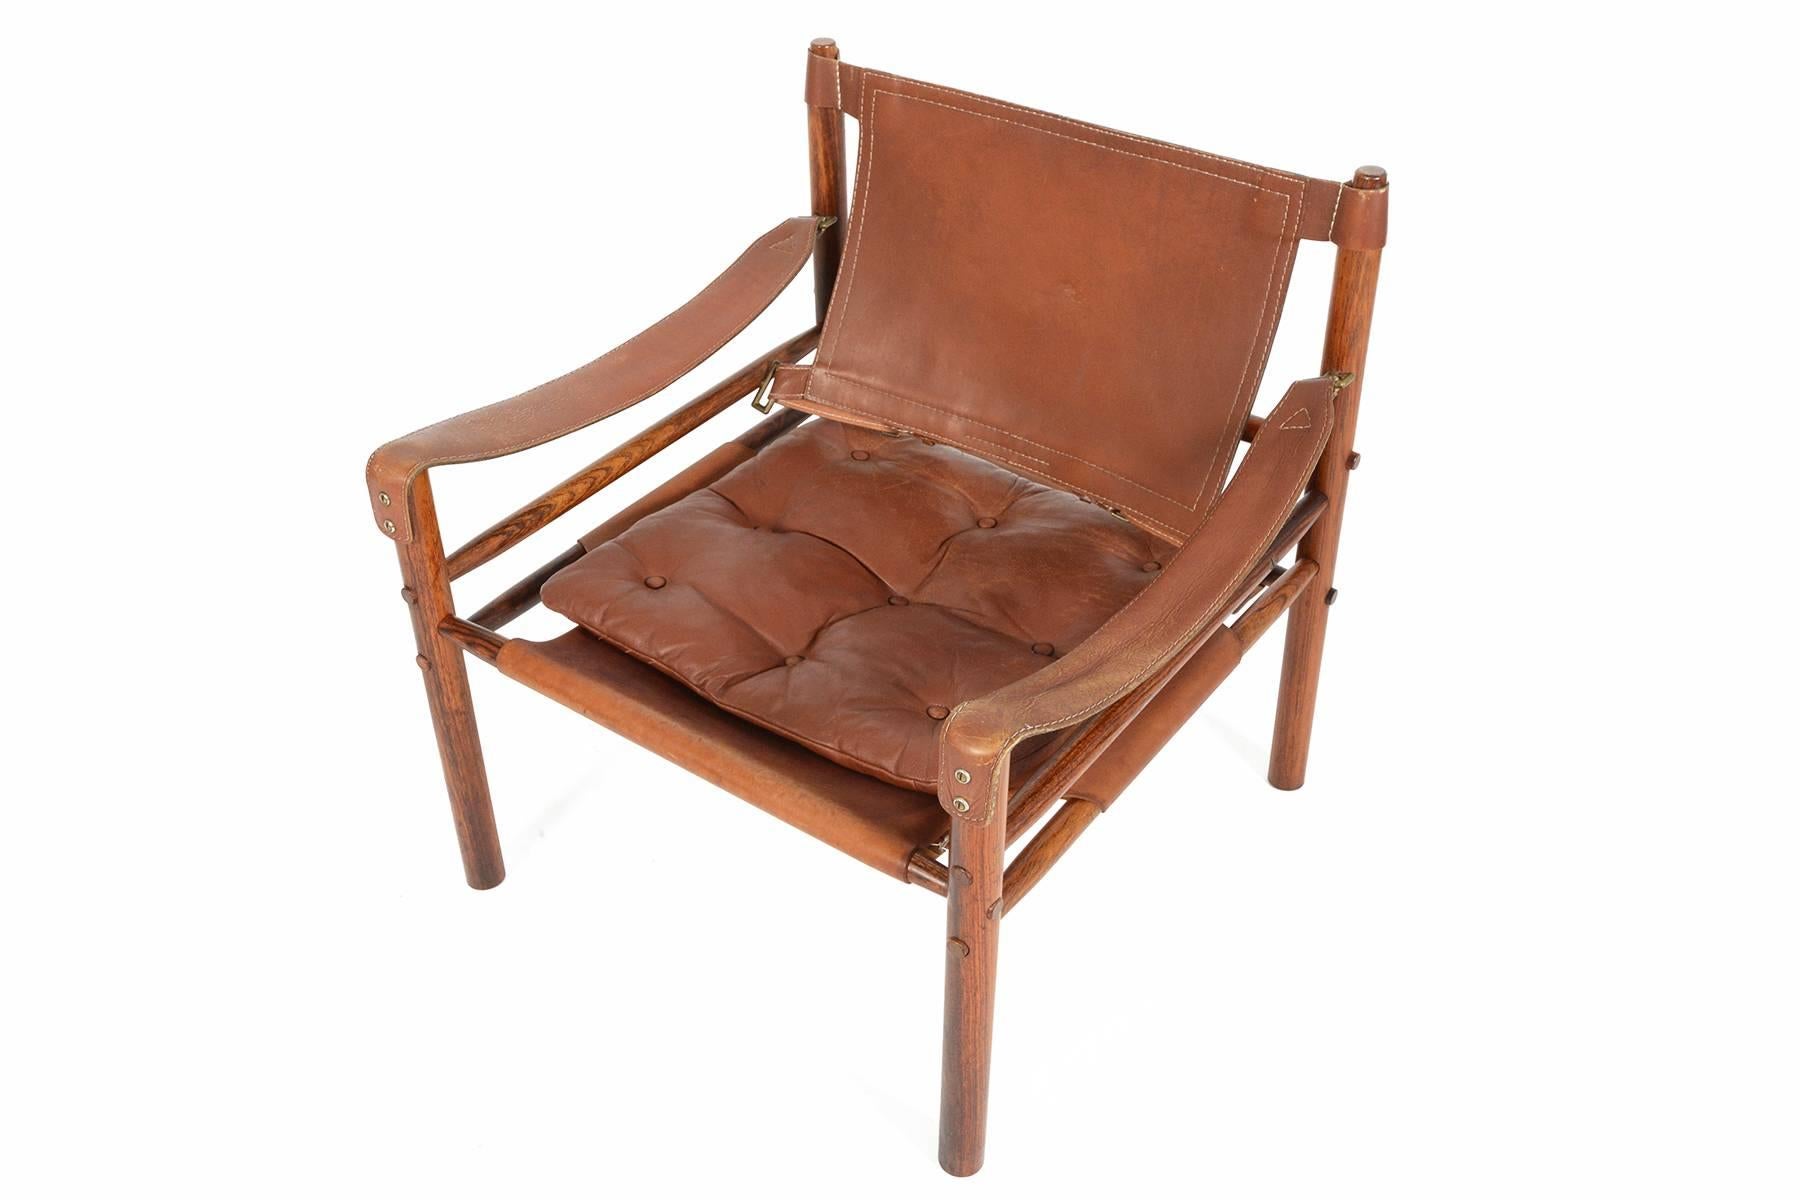 This gorgeous mid century Sirocco chair was designed by Arne Norell in 1964.  The exposed Brazilian rosewood frame is constructed without any glue or screws and uses the support of slung leather. The beautiful original chocolate leather is perfectly